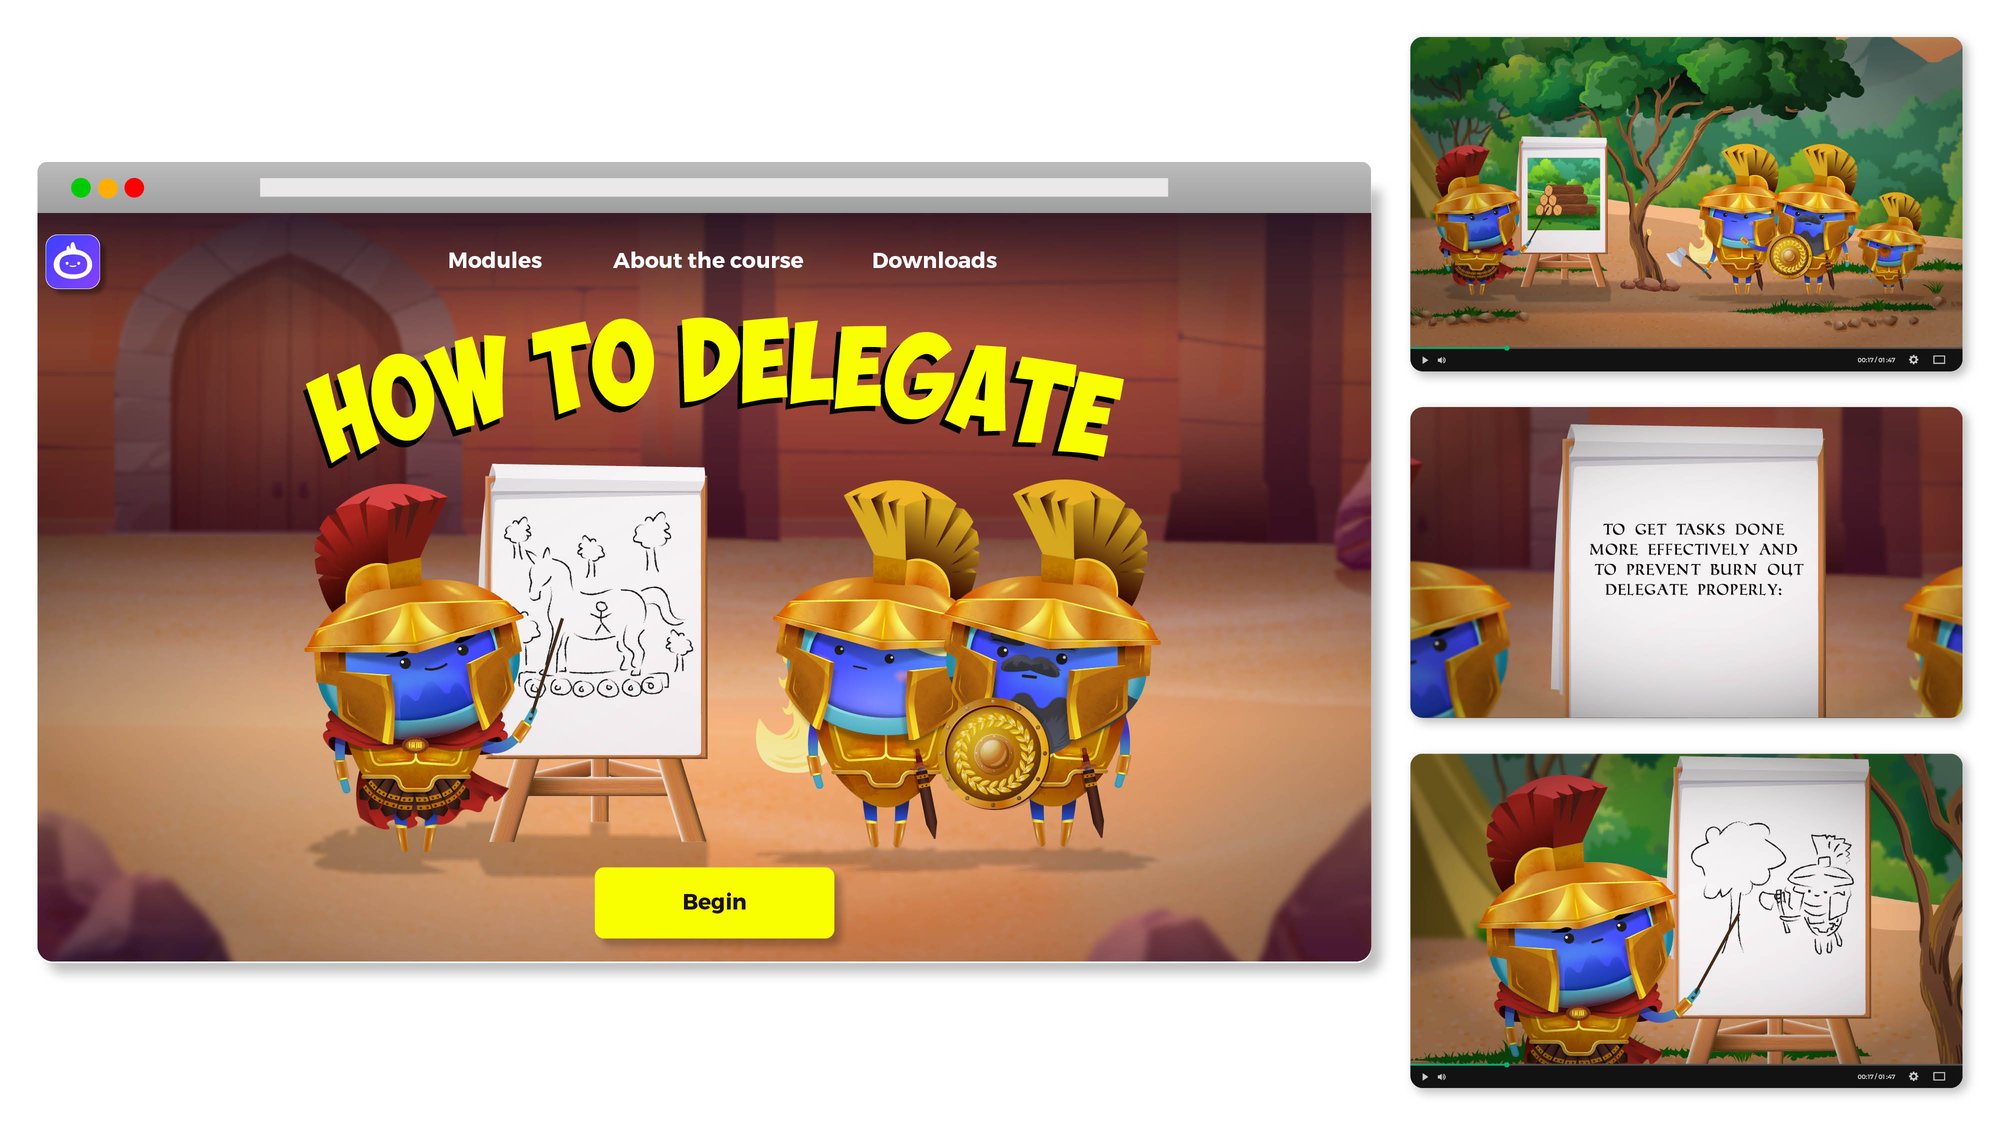 iAM 00281 - How to Delegate - Landing Page